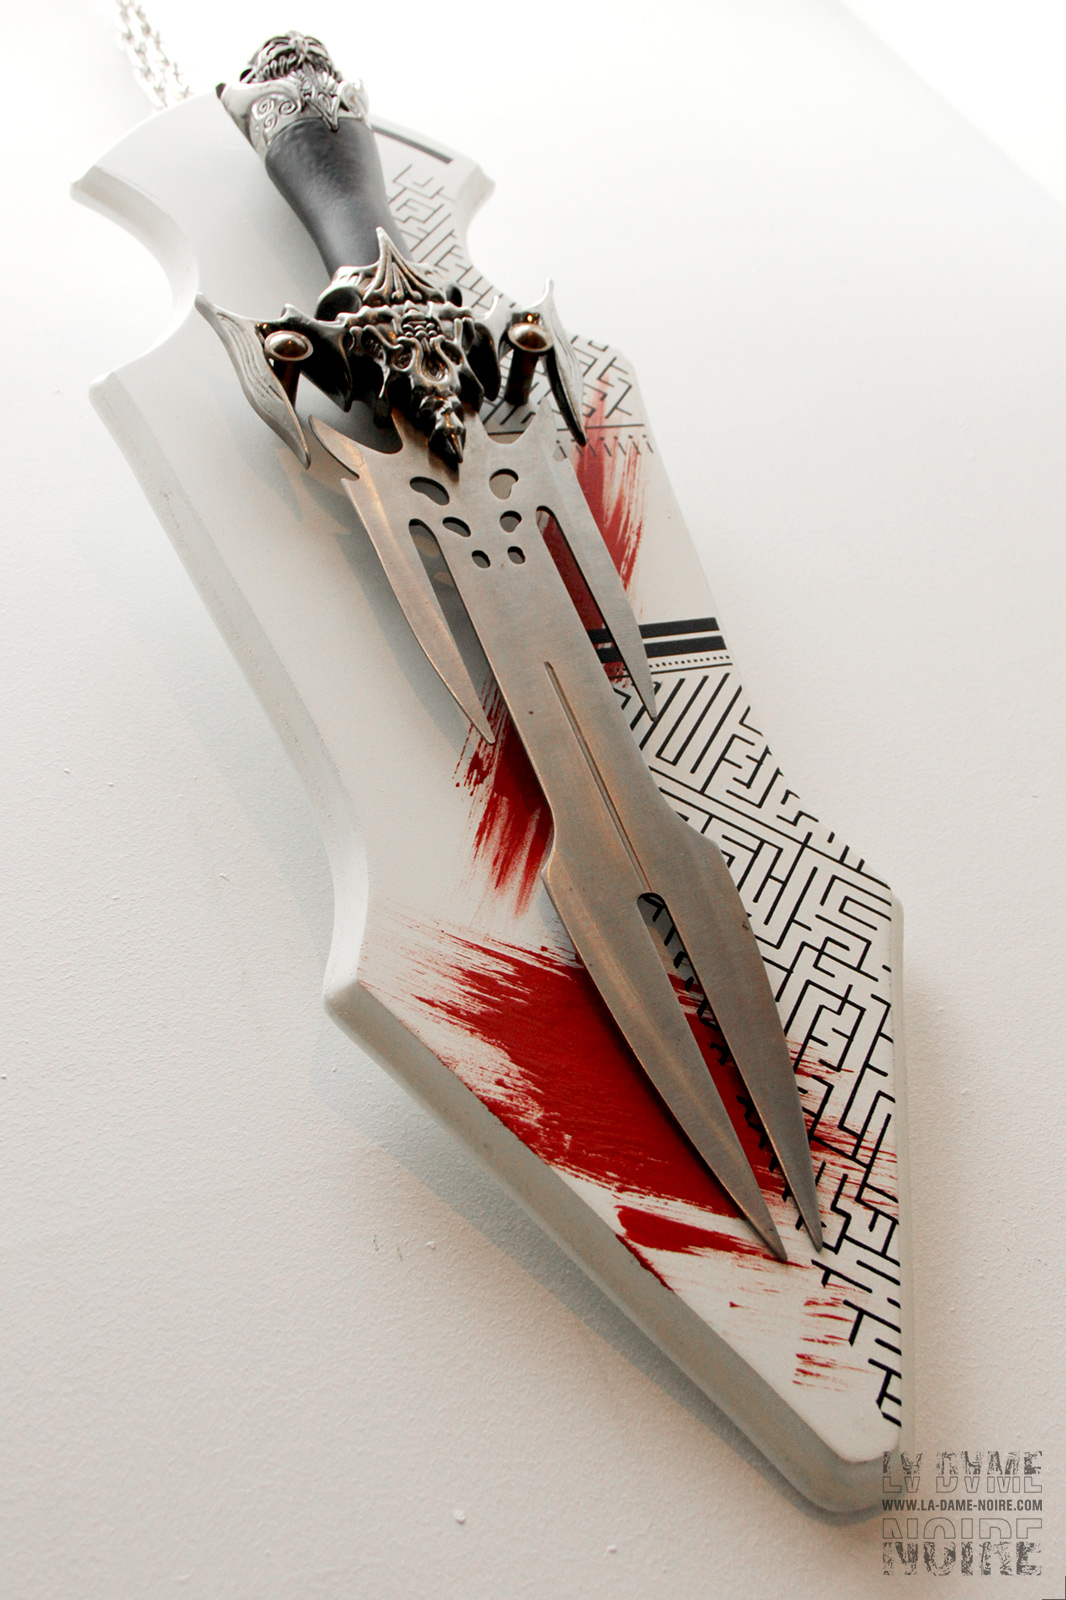 Details of a fantasy viking sword painted in white and red